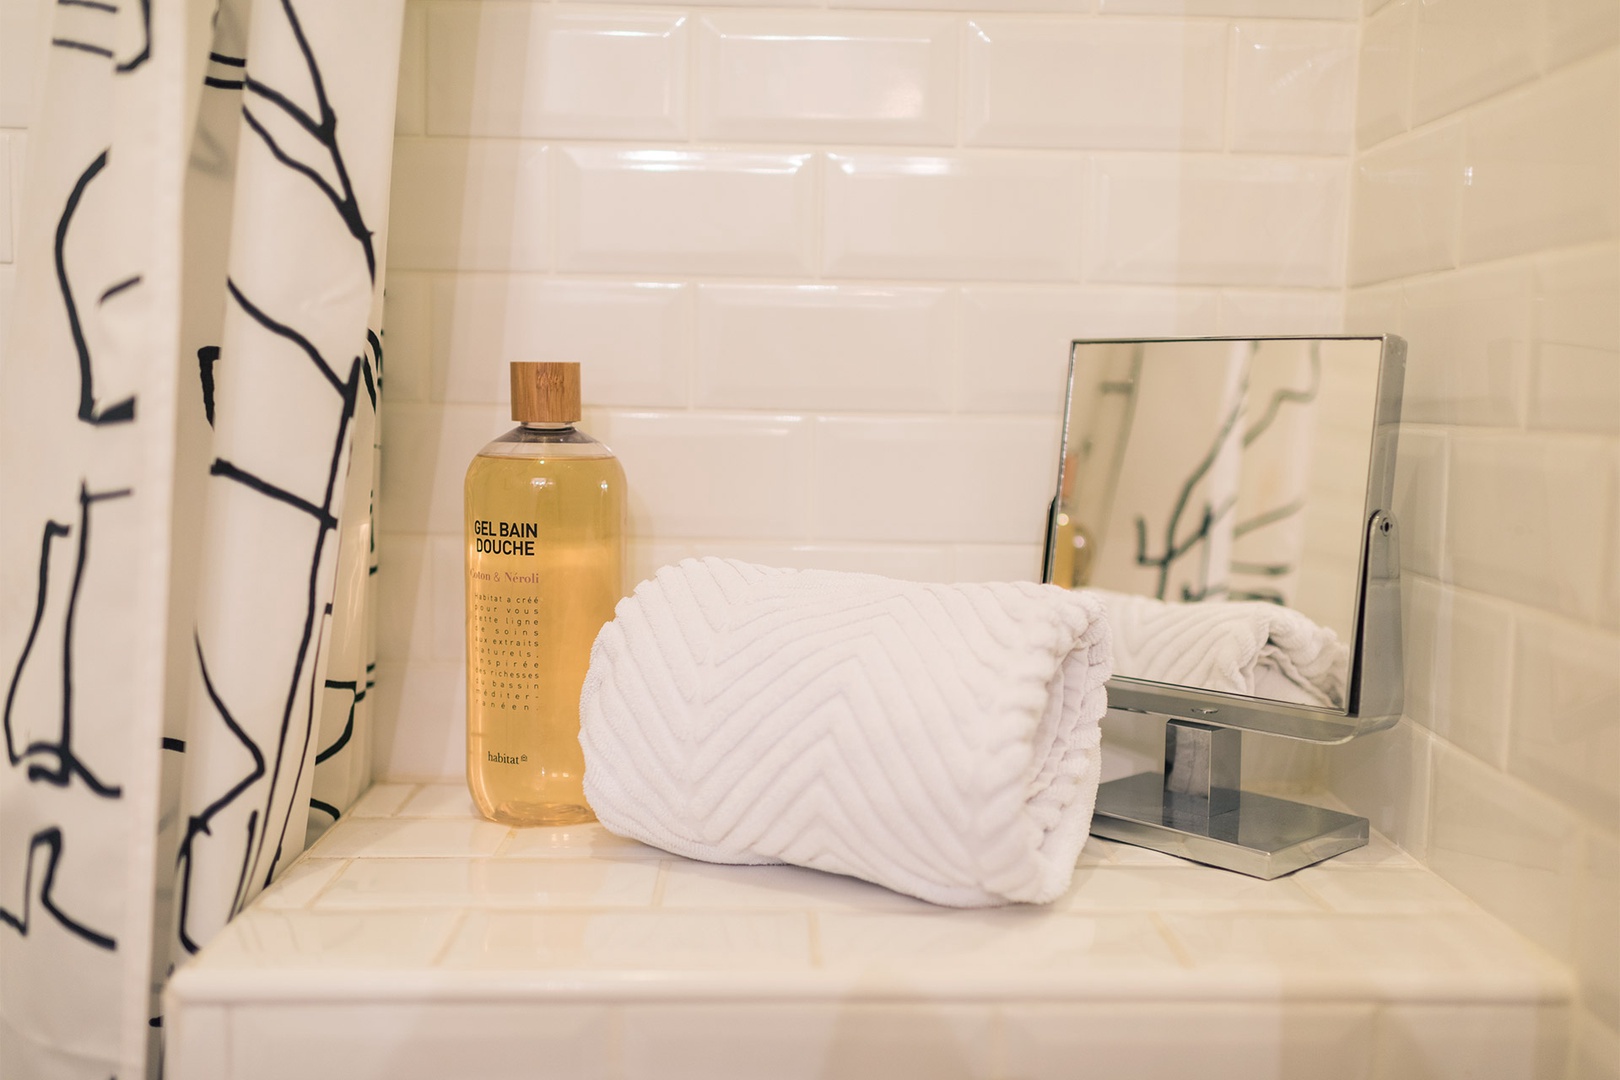 Fluffy towels, soaps and all the luxuries of home await you.